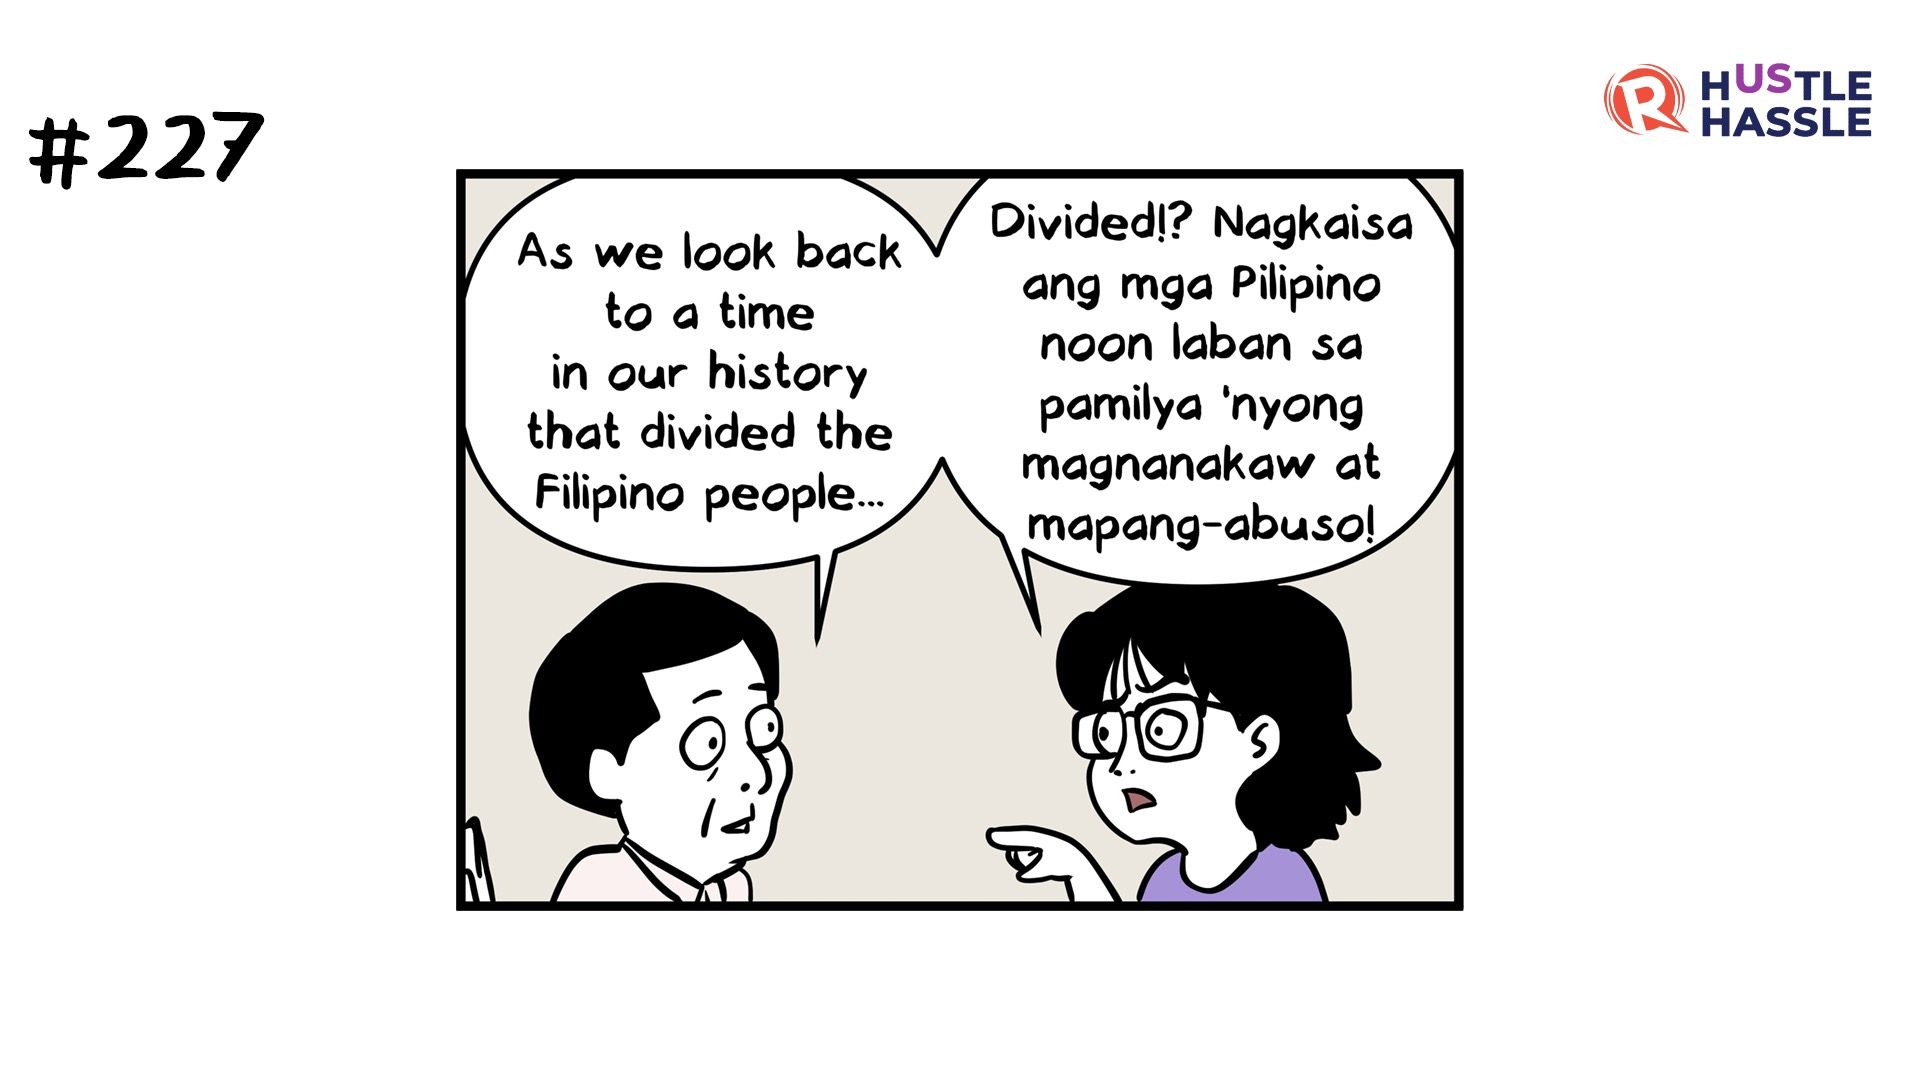 Hustle Hassle: Reconciliation without justice?